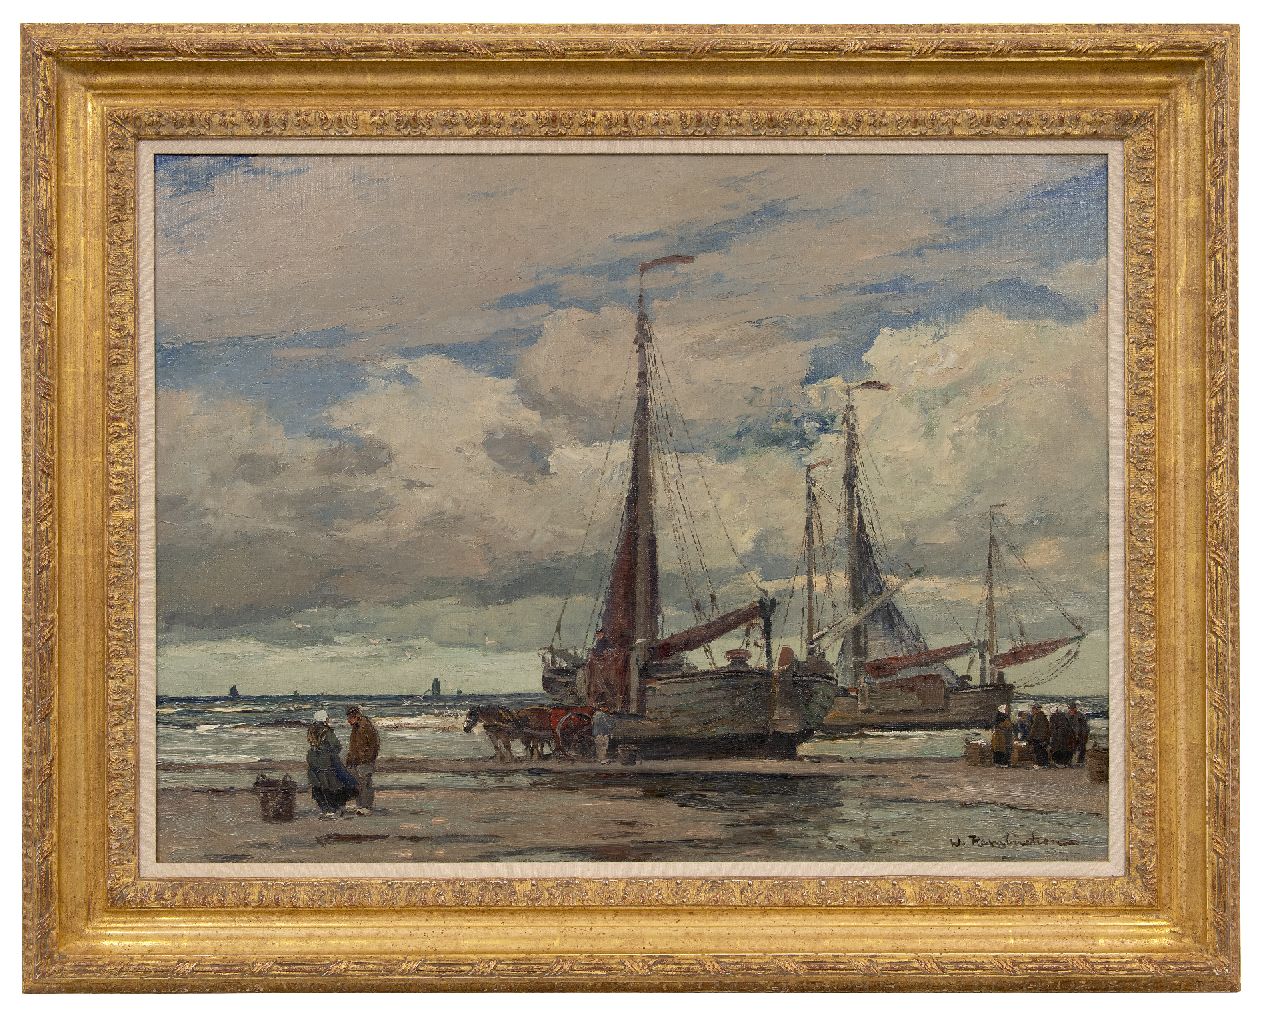 Hambüchen W.  | Wilhelm Hambüchen | Paintings offered for sale | The arrival of the fleet, oil on canvas 60.2 x 80.4 cm, signed l.r.